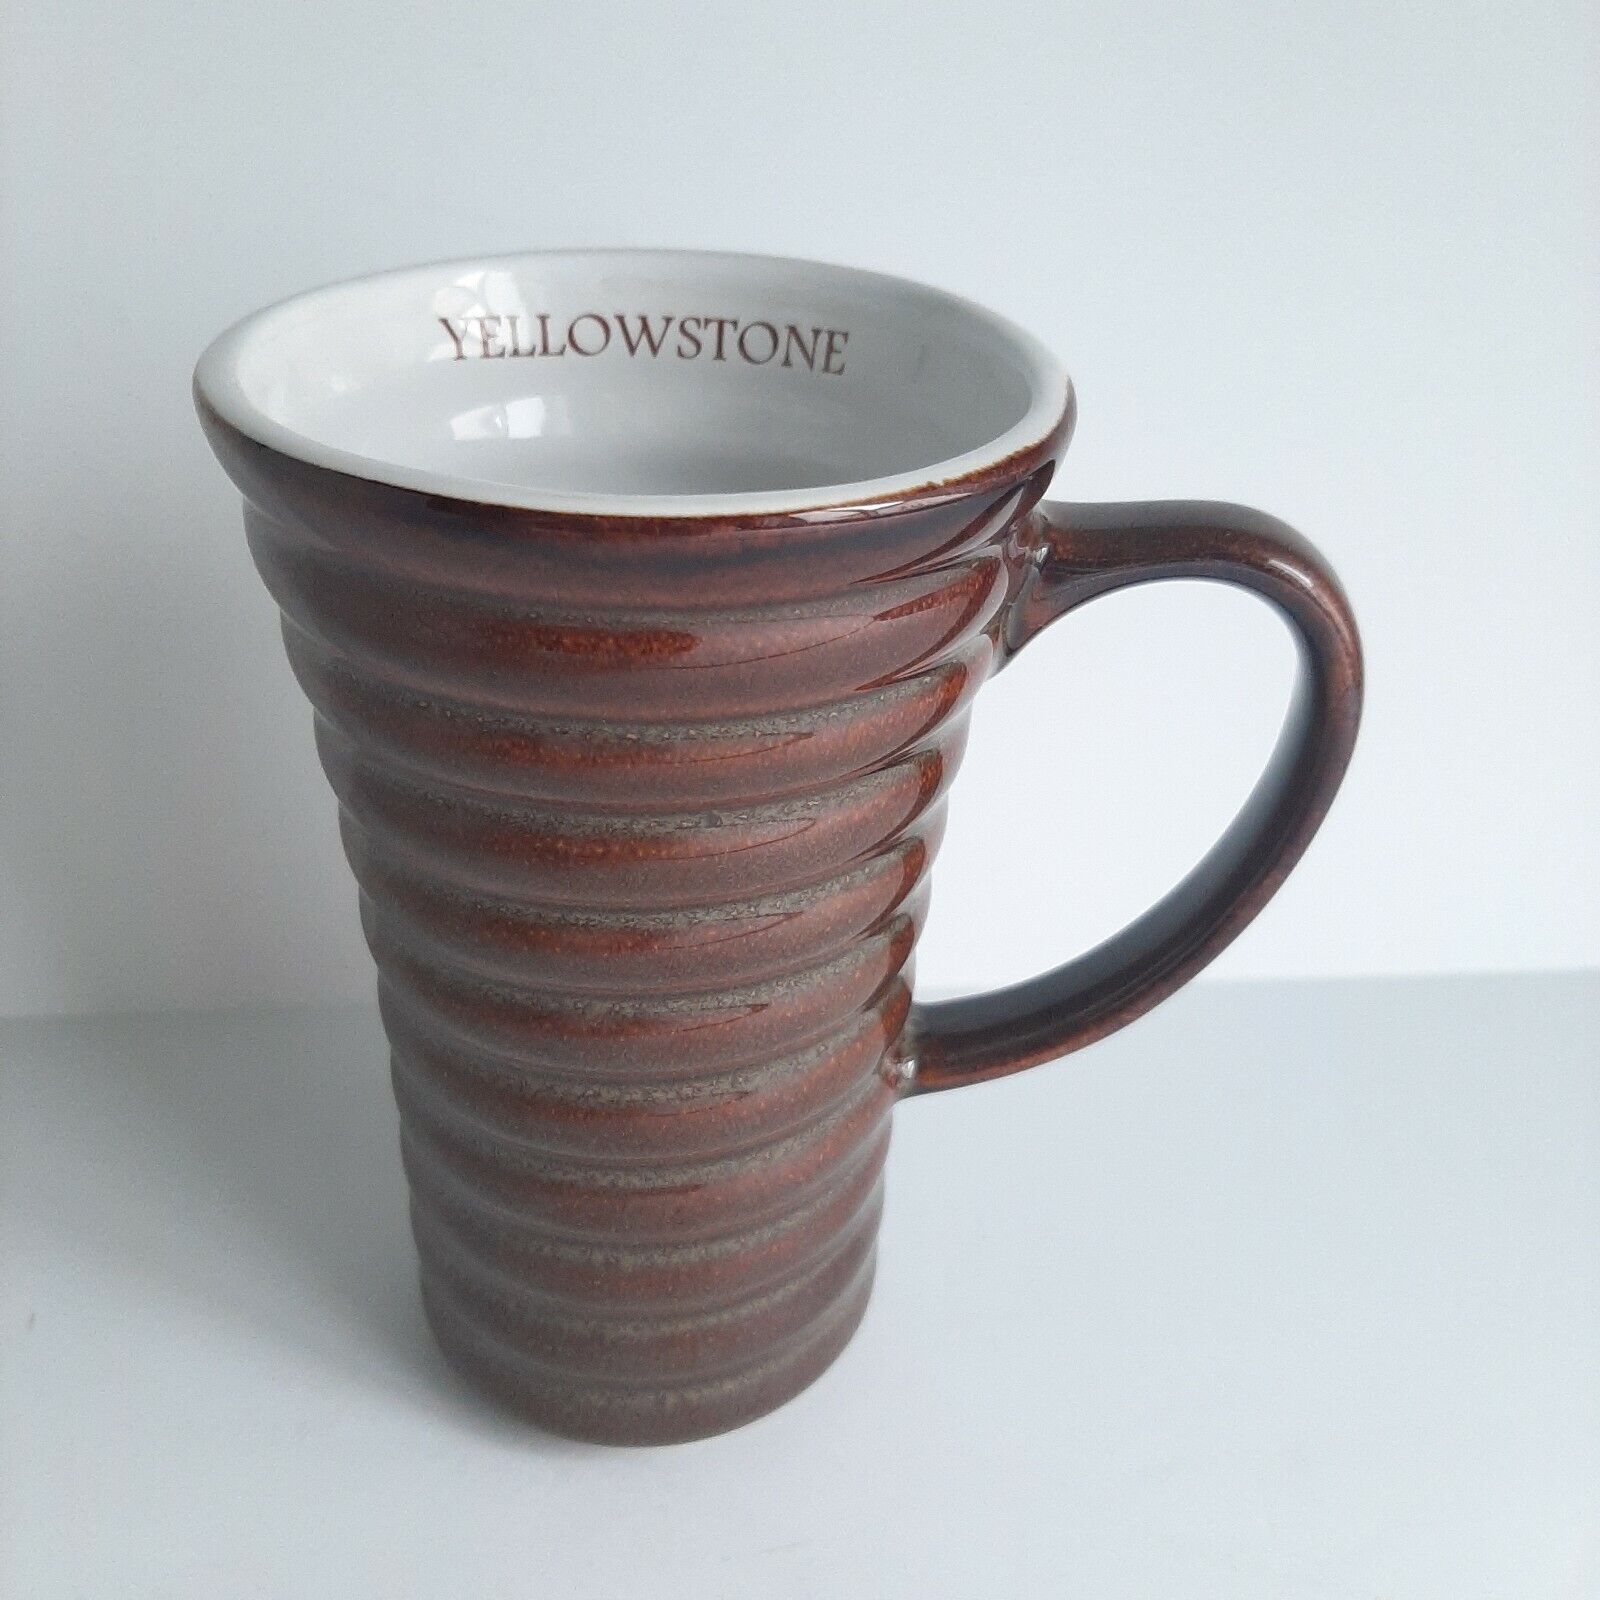 Unique YELLOWSTONE Coffee Tea Mug Ribbed varied shades of brown MINT CONDITION